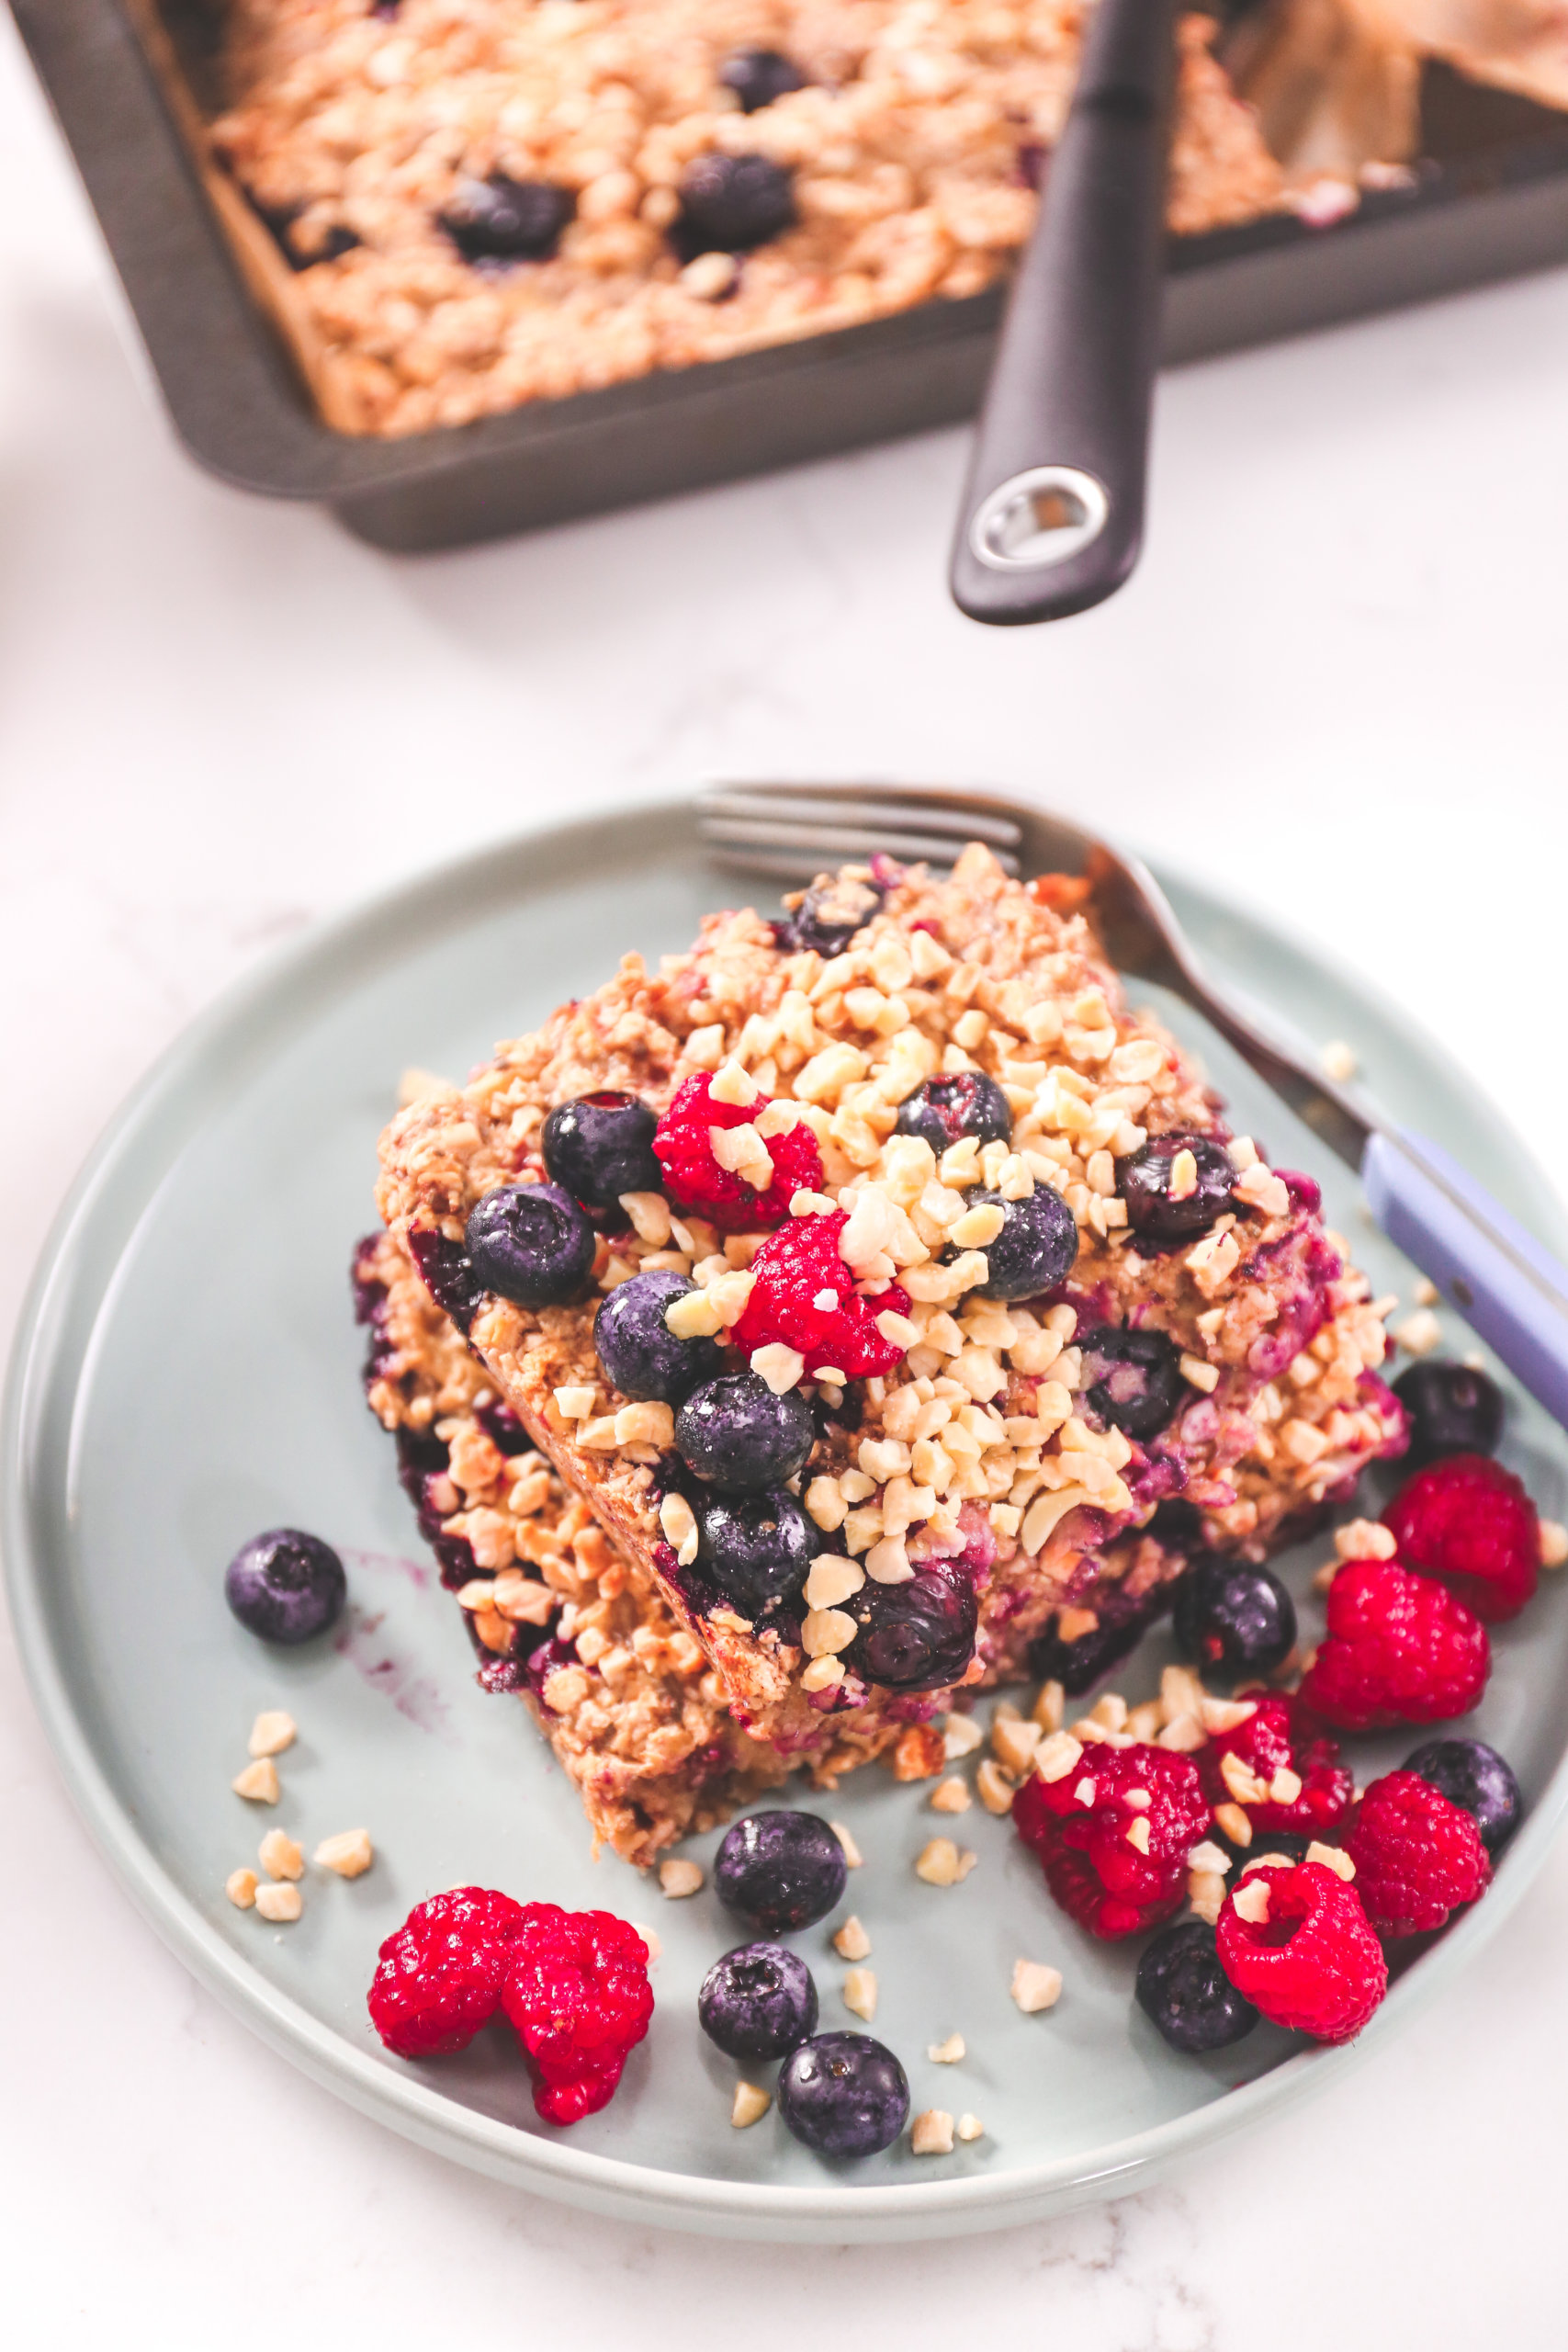 Baked Almond and blueberry Oatmeal